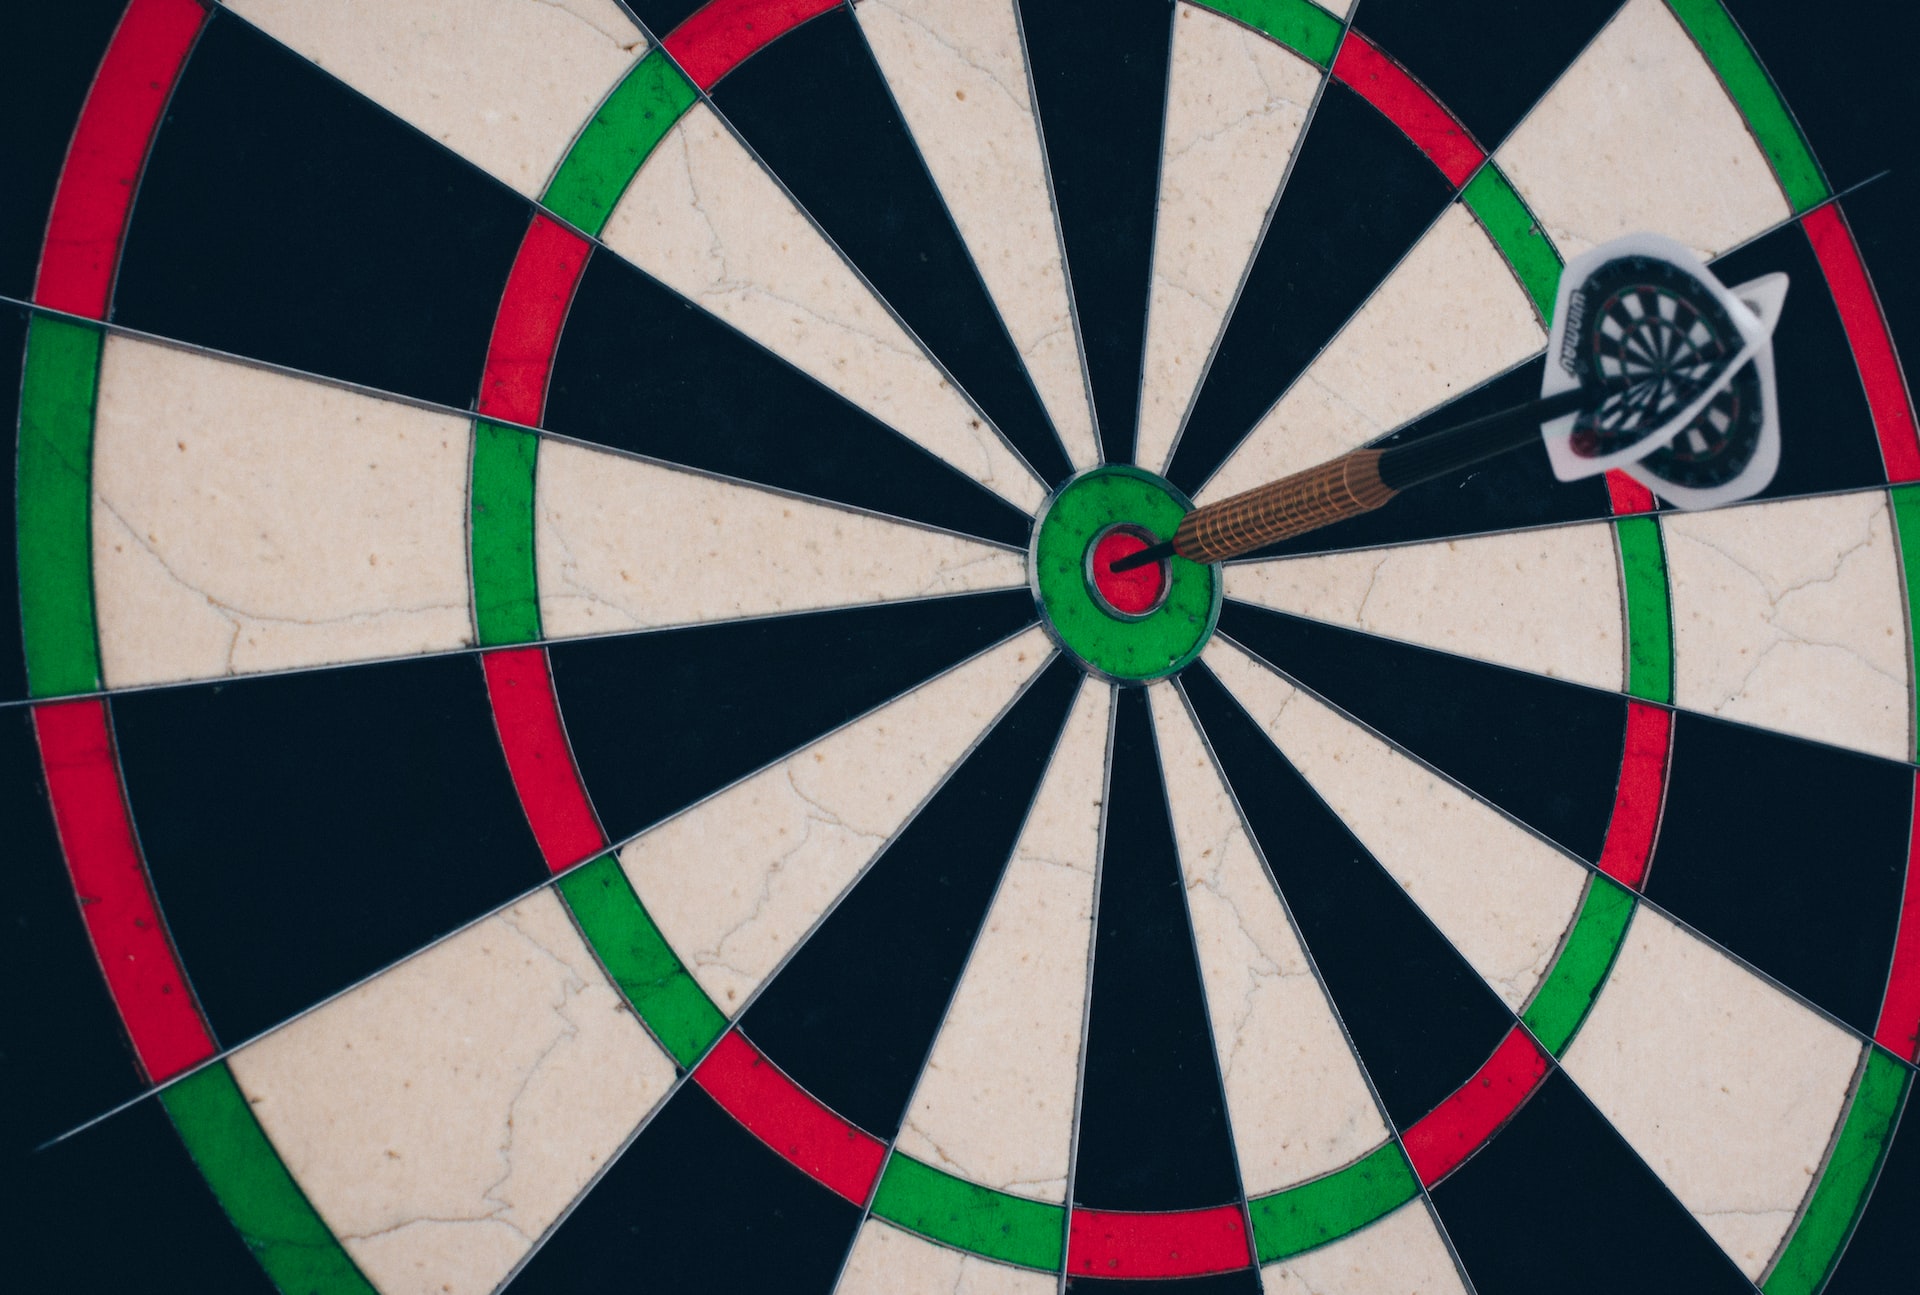 A new approach to content-based targeting for advertising